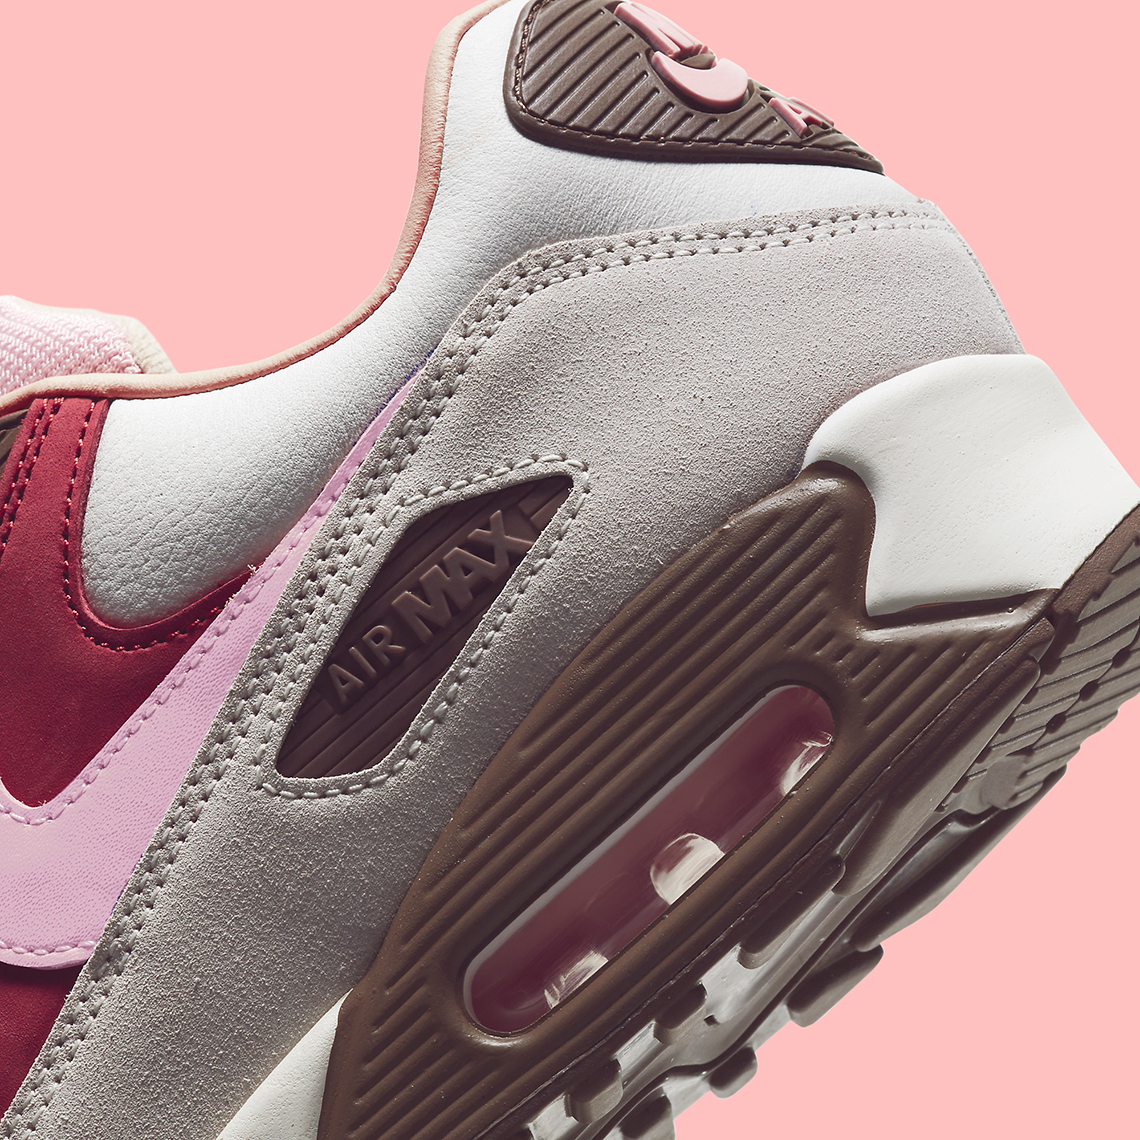 nike air max 90 bacon CU1816 100 official images 5